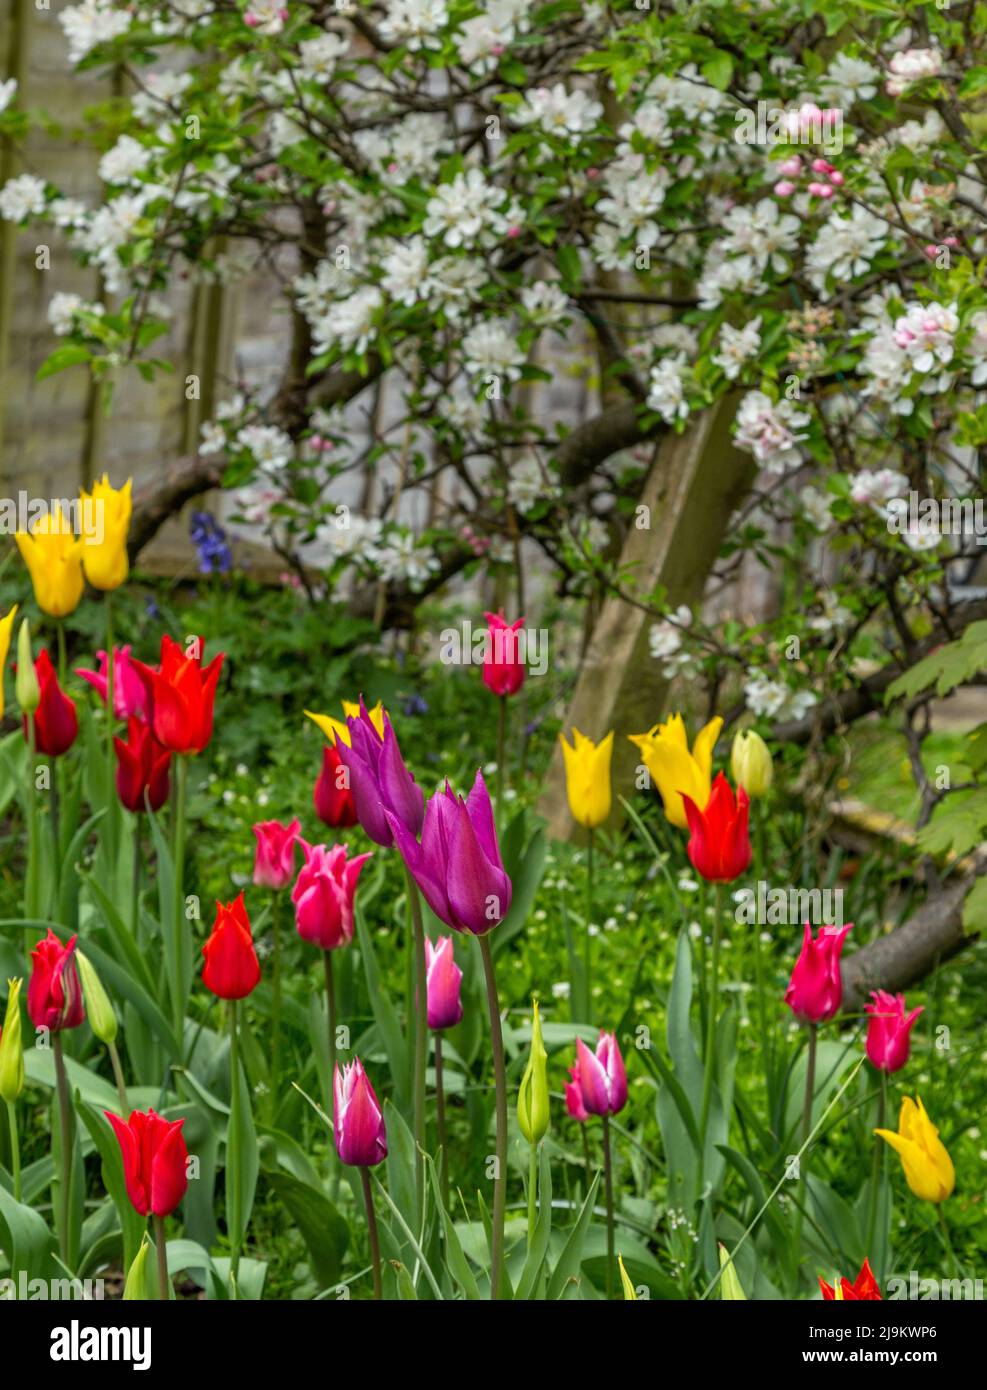 Mixed tulip flowers under apple trees in a Yorkshire garden. Stock Photo